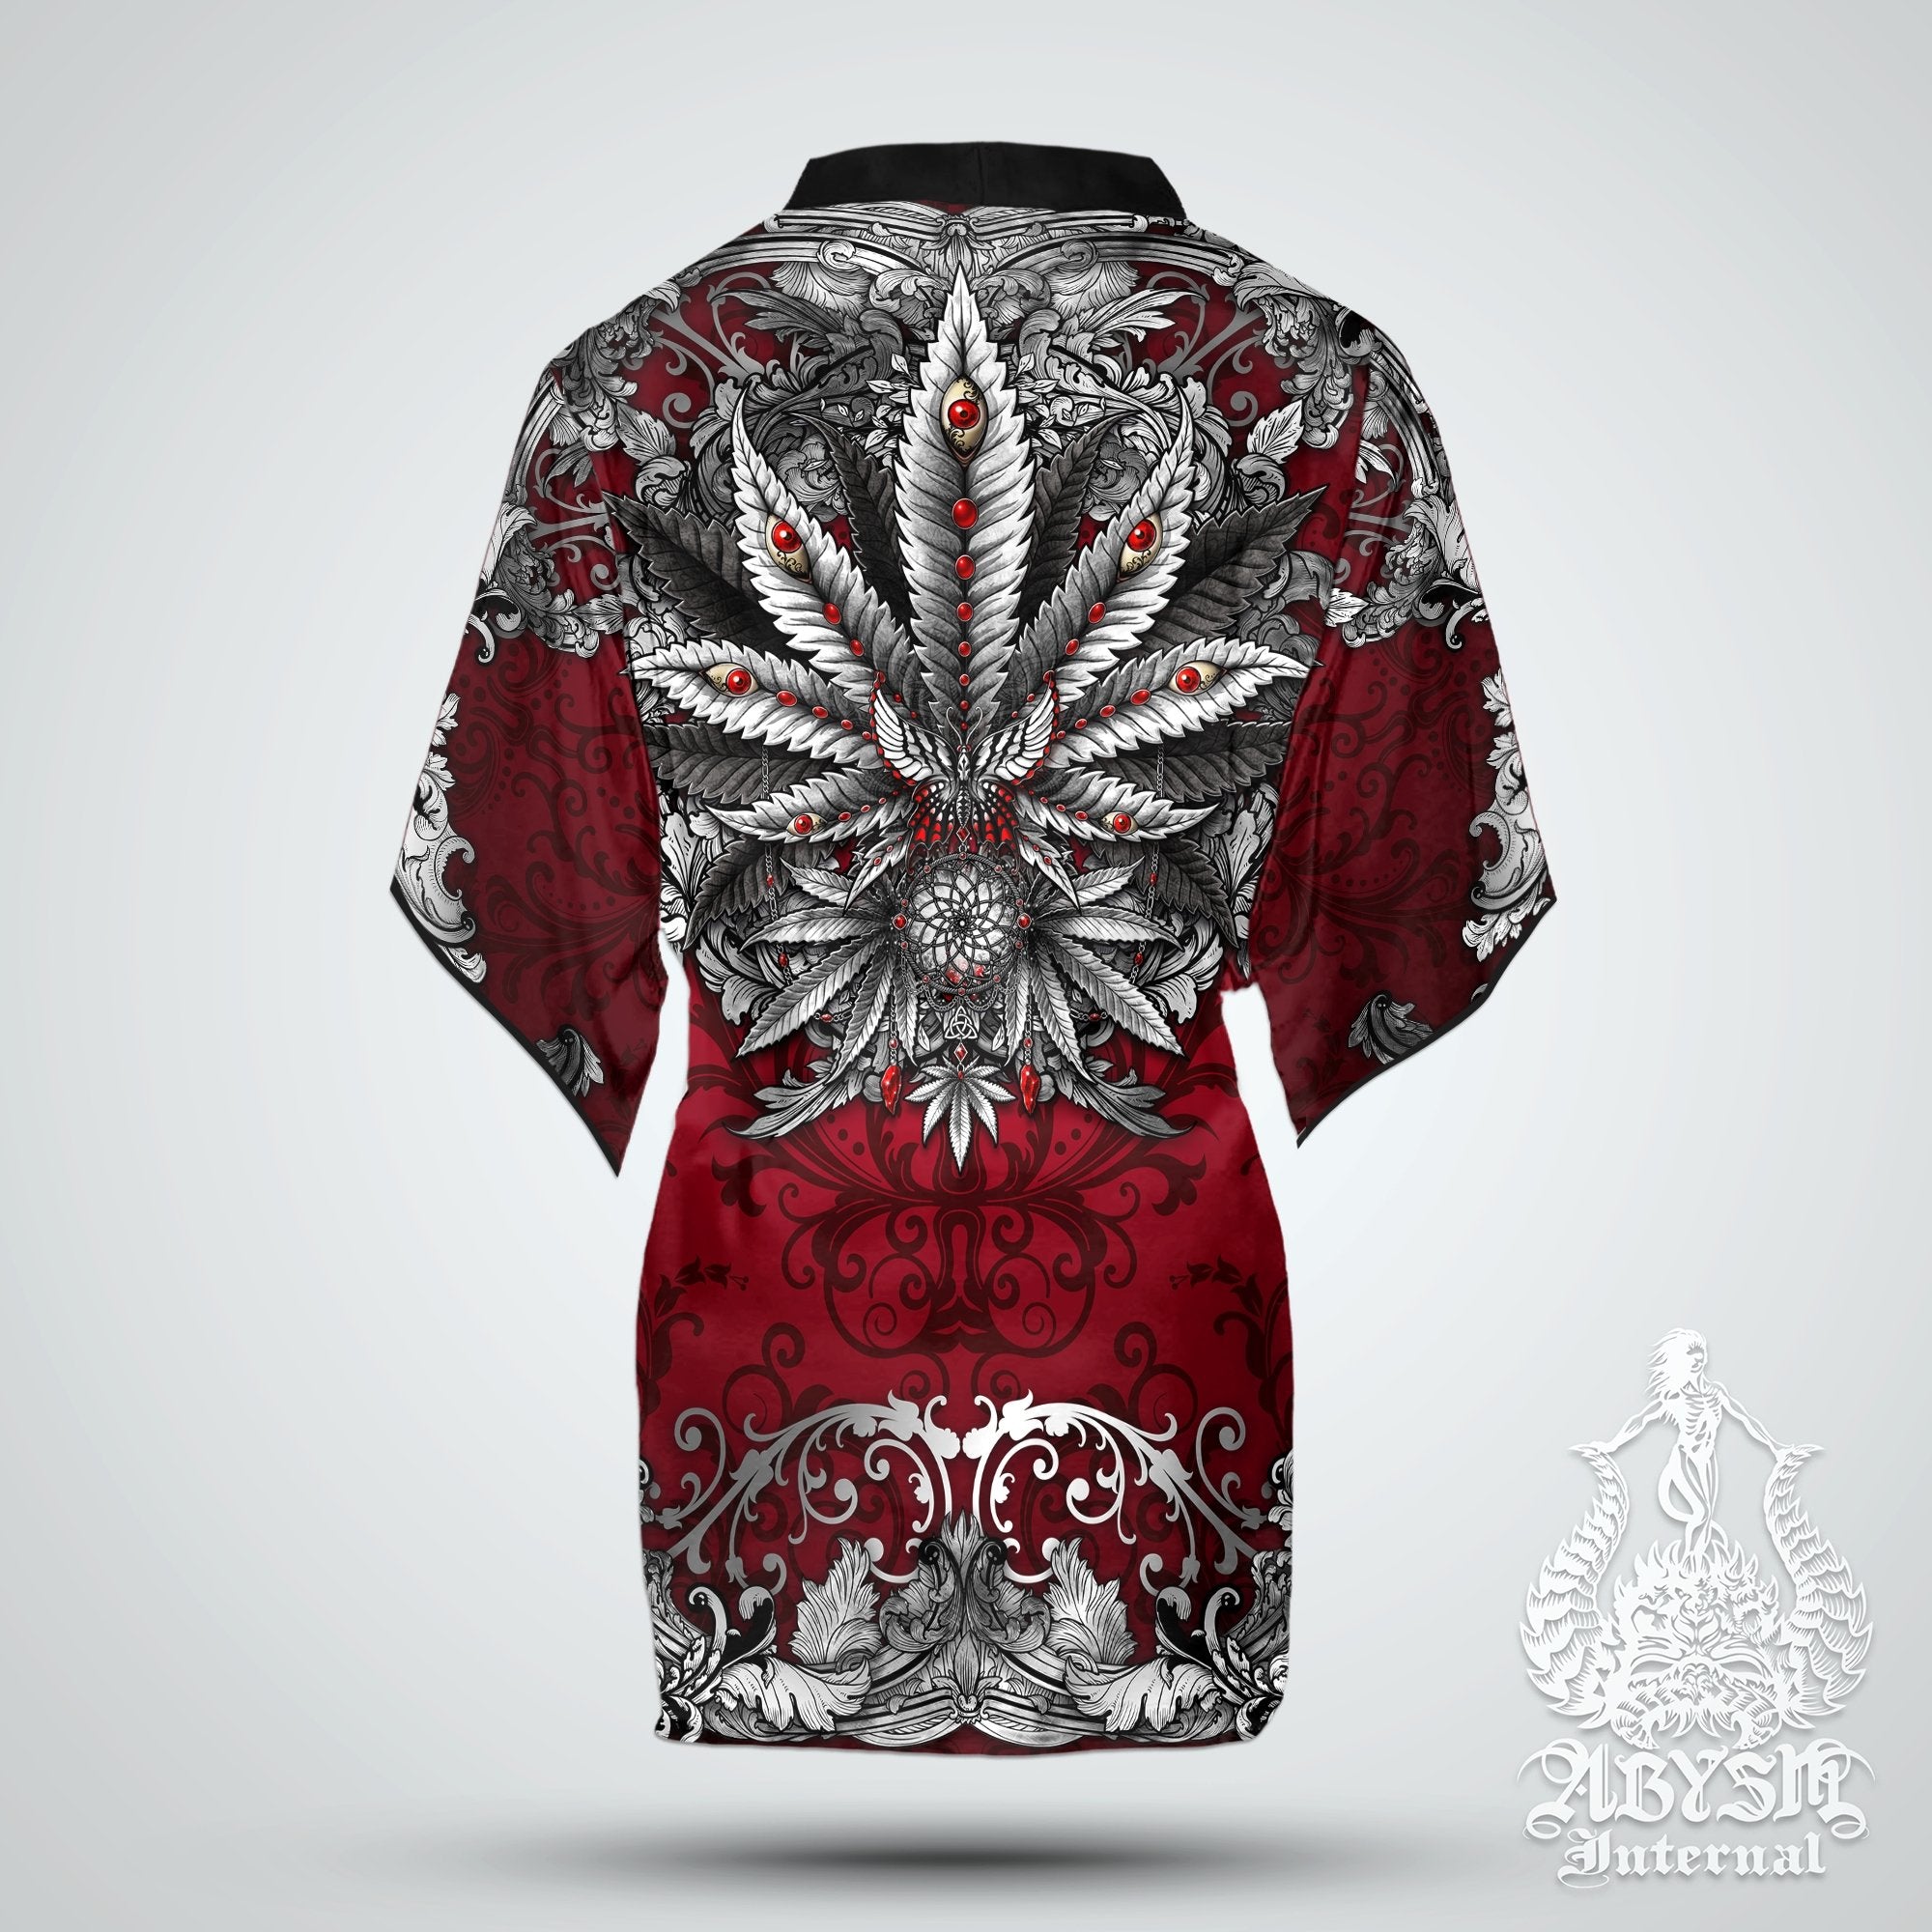 Weed Cover Up, Cannabis Outfit, Indie Party Kimono, Summer Festival Robe, 420 Gift, Alternative Clothing, Unisex - Marijuana, Silver - Abysm Internal